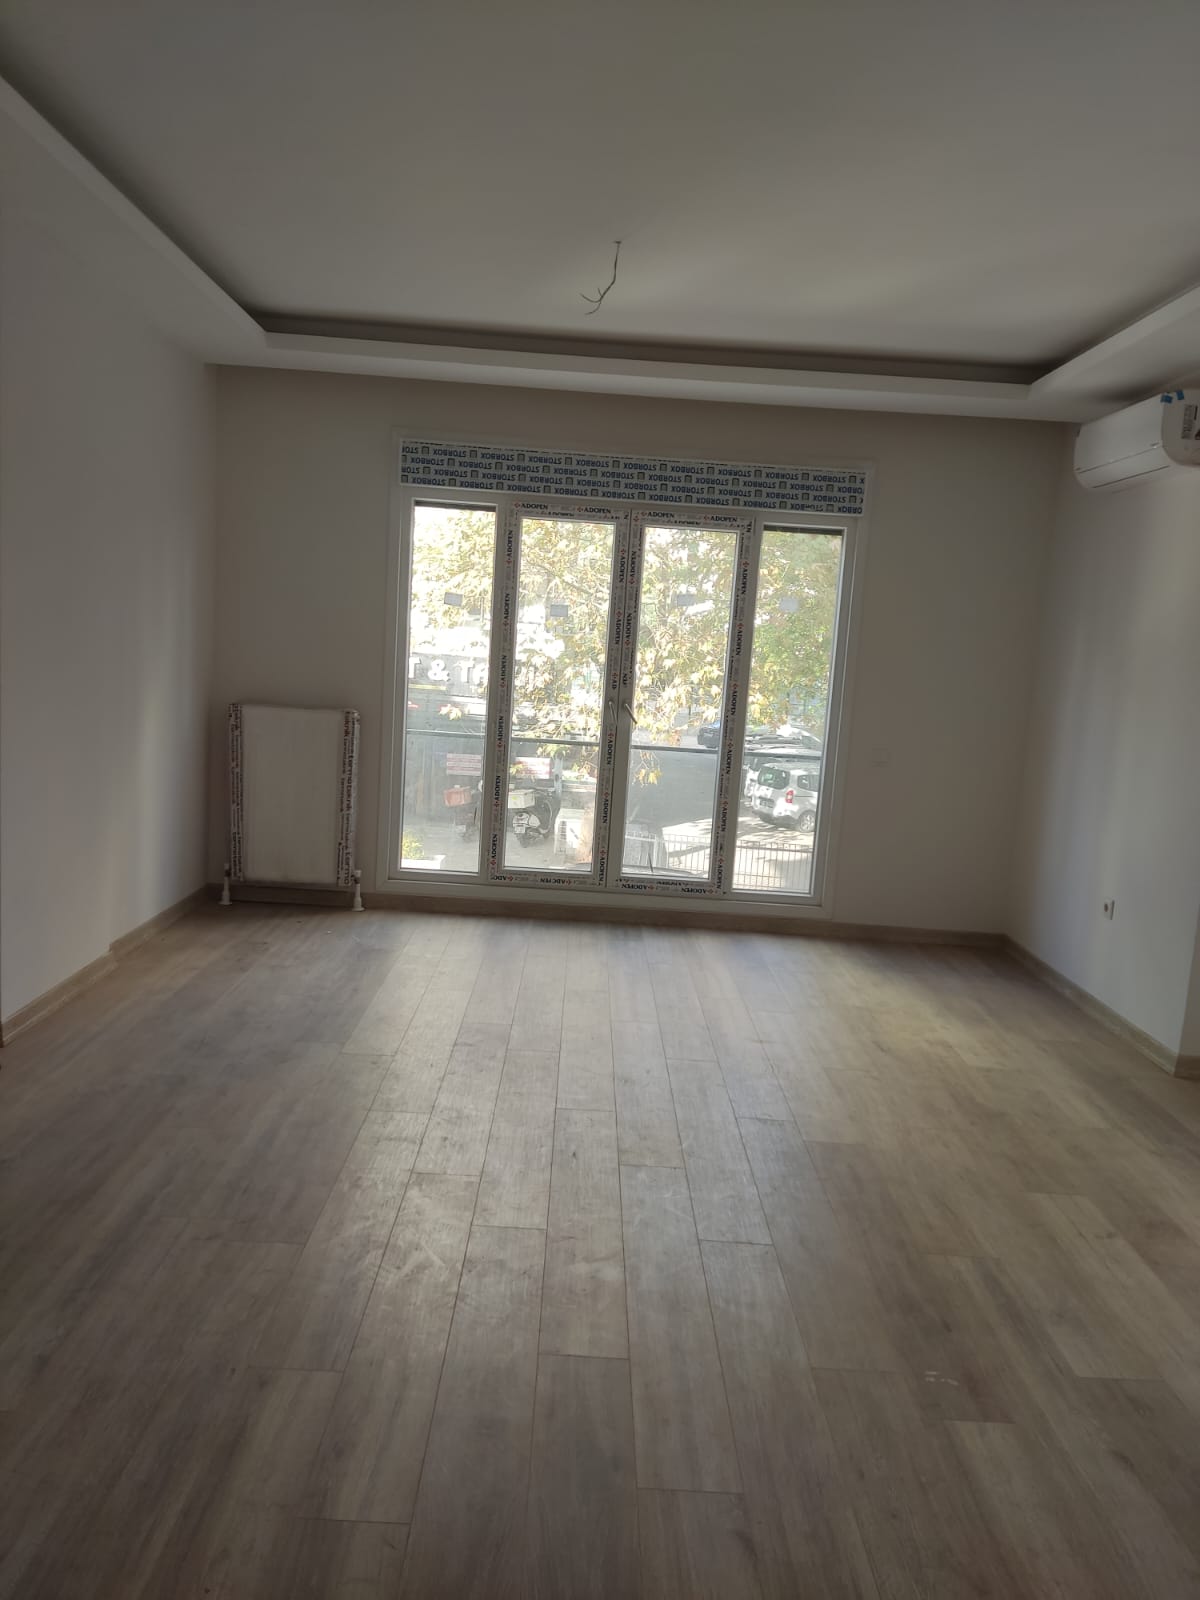 2+1 Apartment for Sale in Erenköy, Istanbul, Eligible for Citizenship, 1 Minute to the Marmara Sea, Excellent Location,